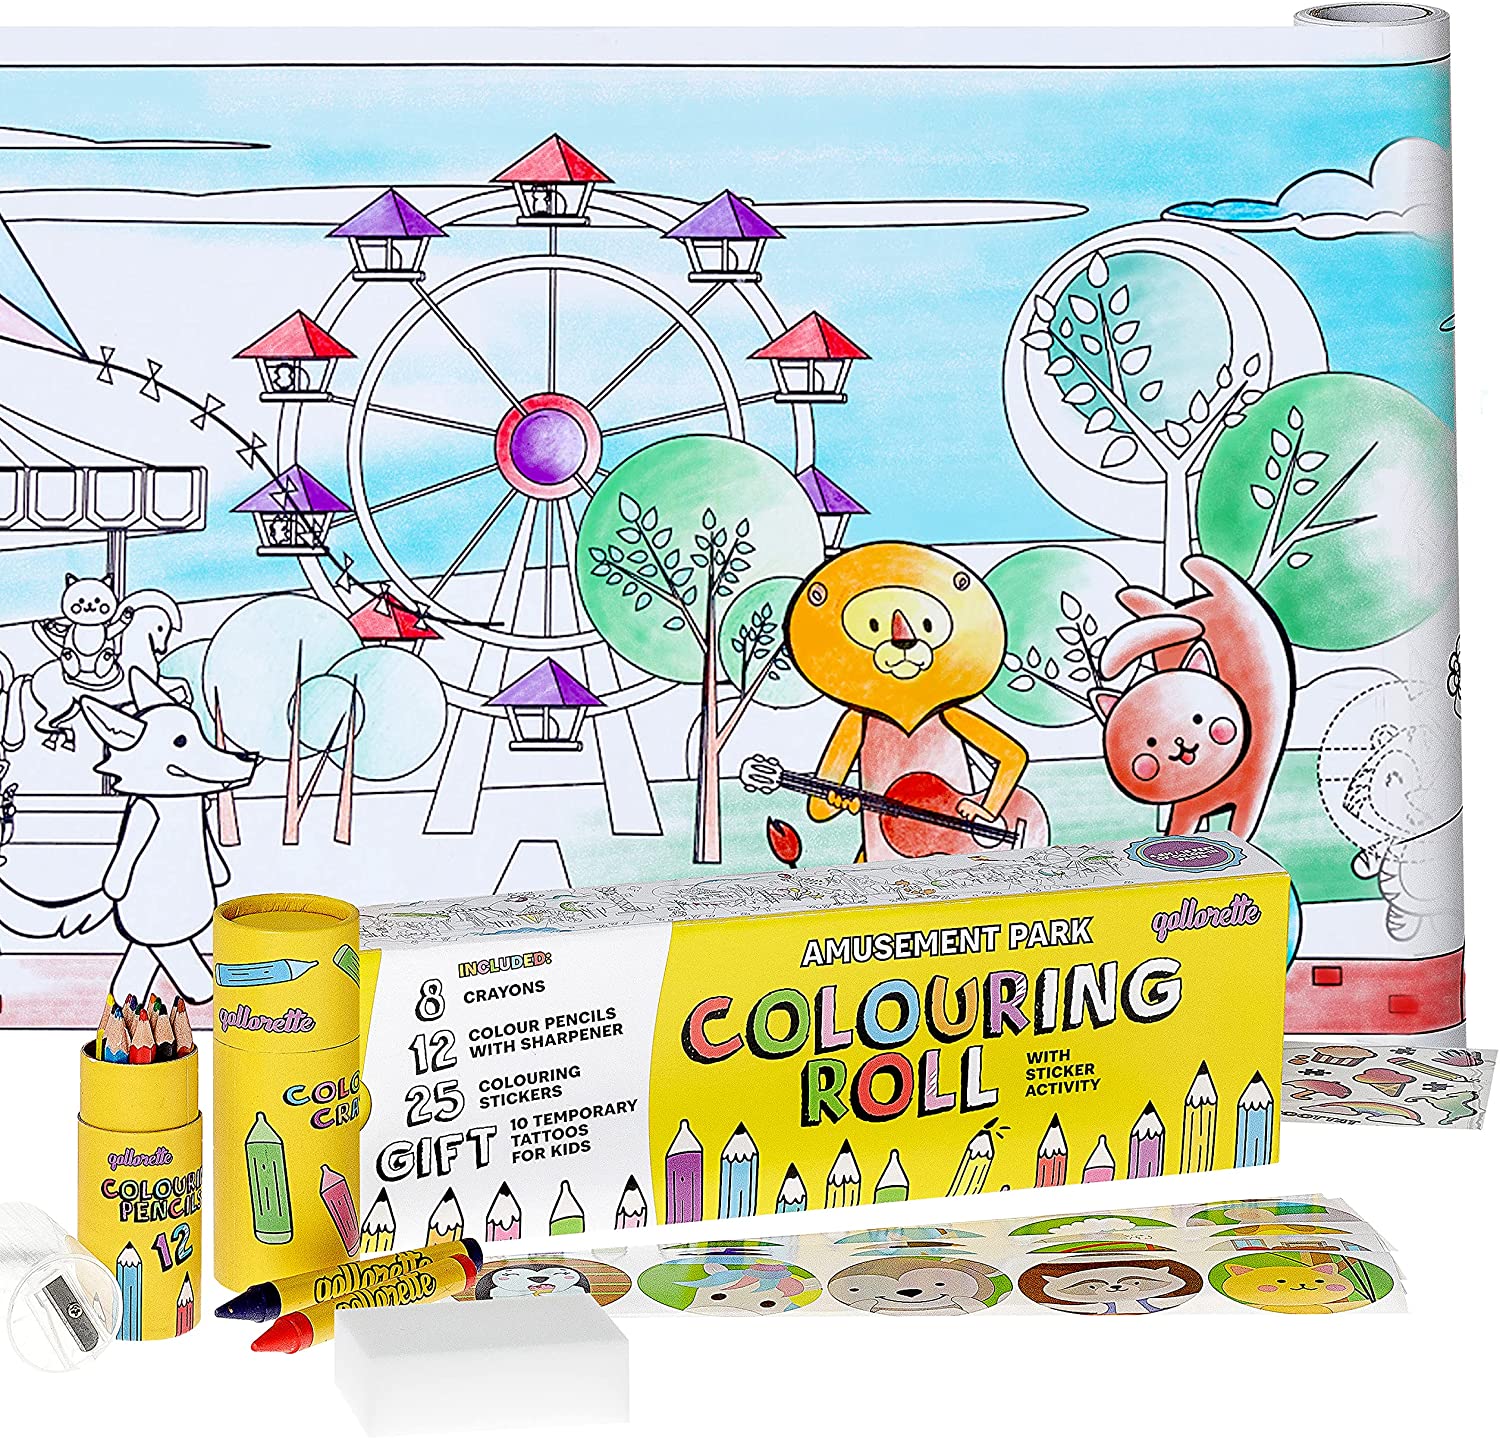 Missy's Product Reviews : Qollorette Amusement Park Colouring Roll with  Sticker Activity & Retro Car & Gas Station 3D Wooden Puzzle Easter Gift  Guide 2022